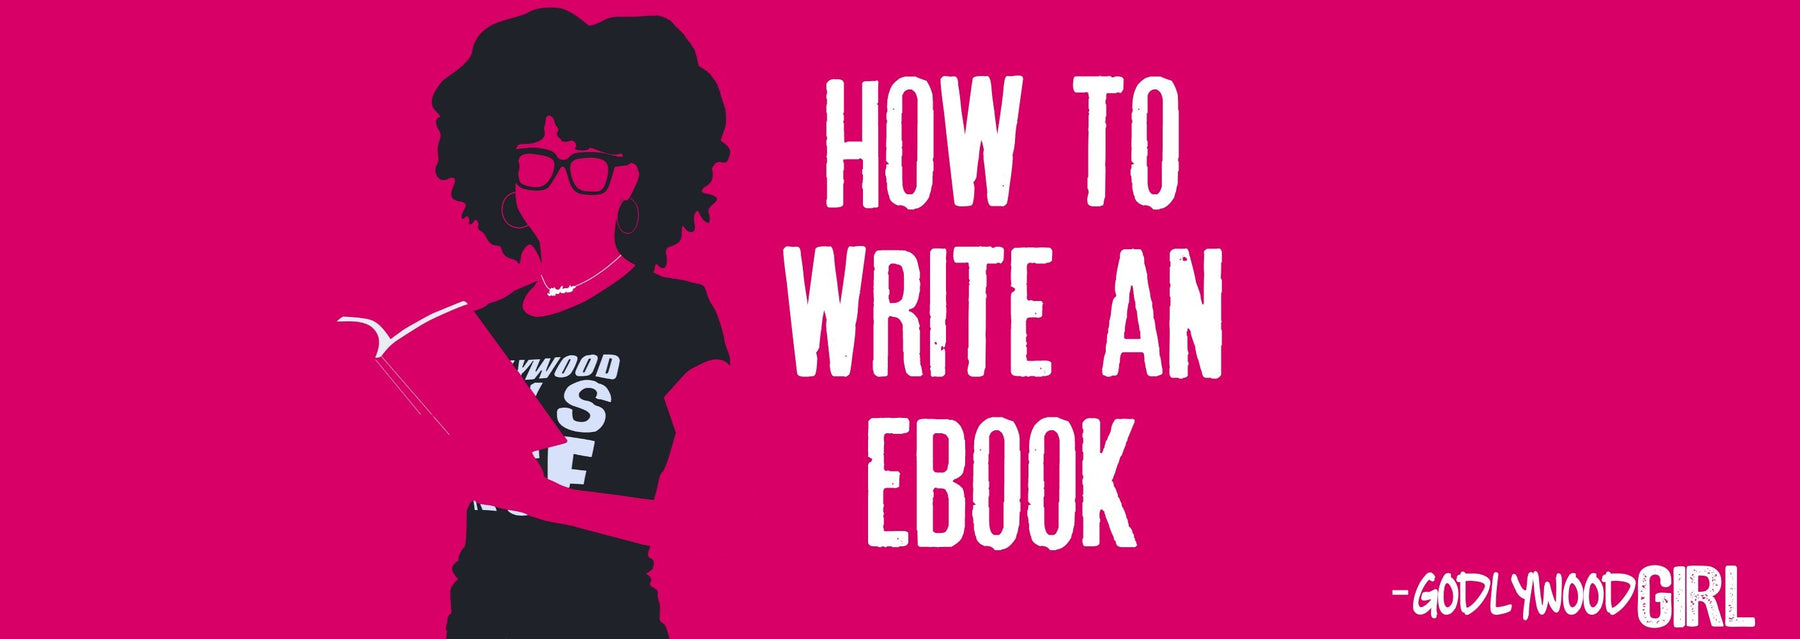 HOW TO WRITE AN EBOOK (EBook Series For Christian Entrepreneurs) || HOW TO